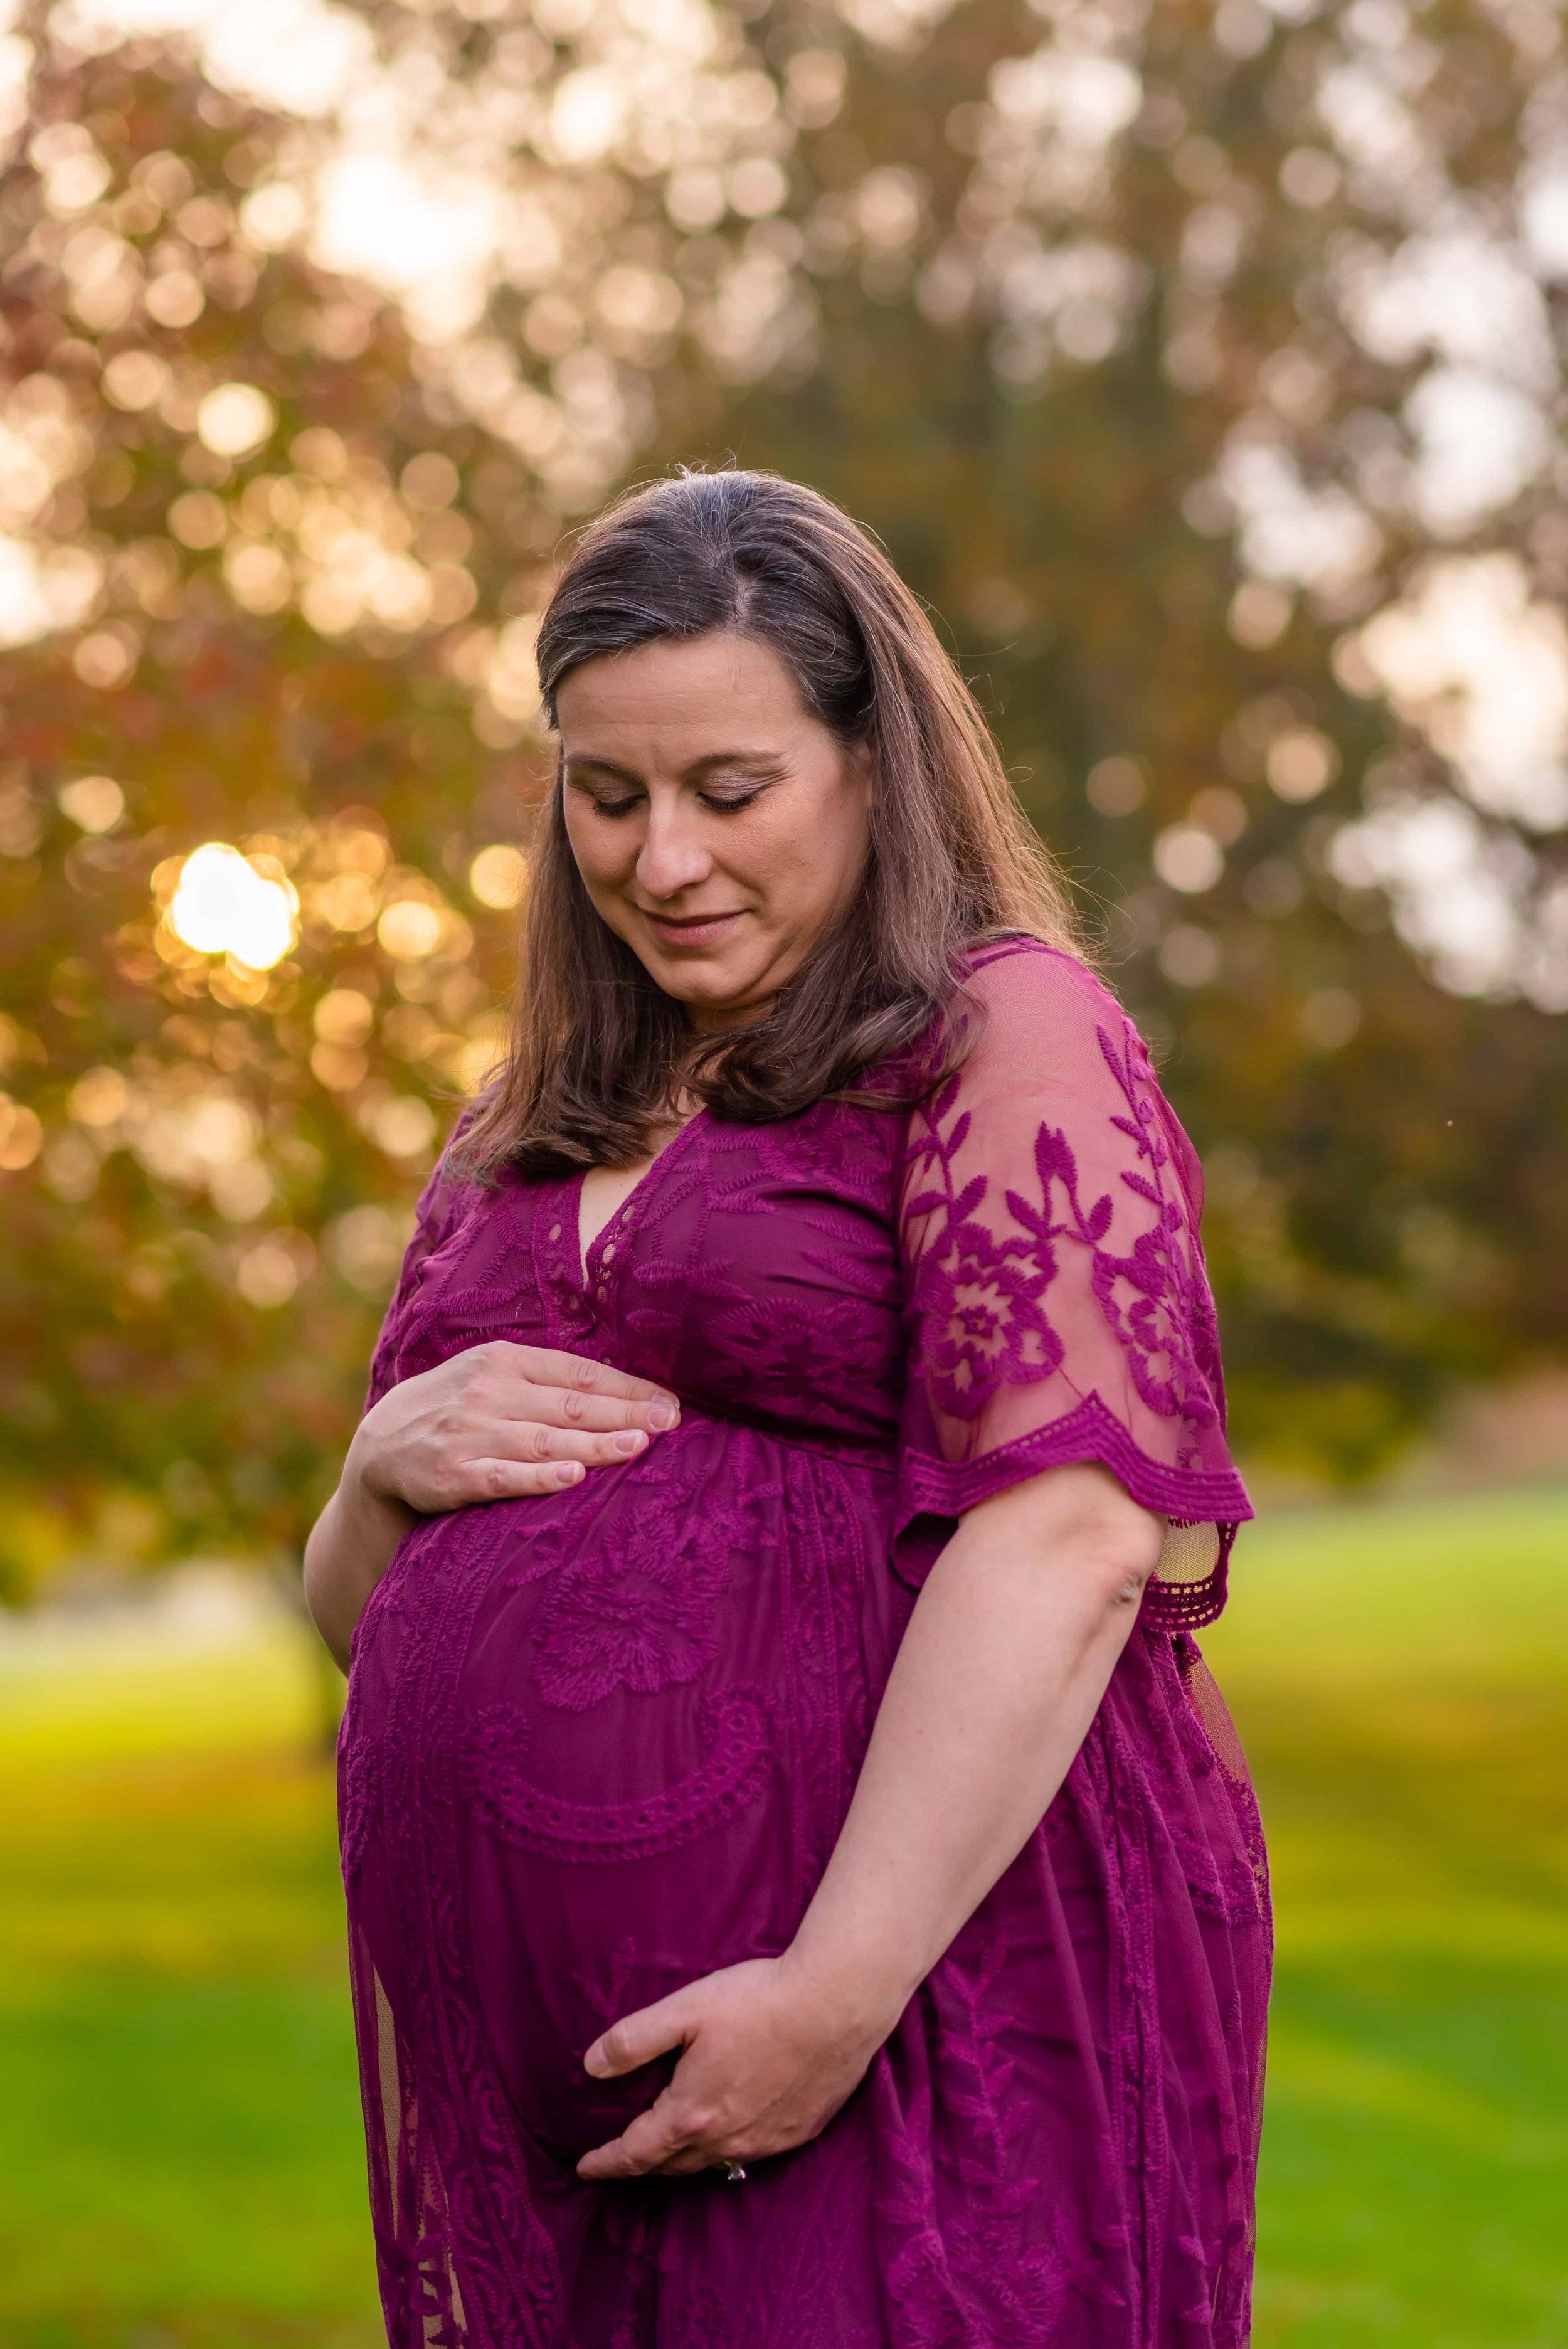 Maryland Maternity Photos - Pregnant woman looking down at her belly